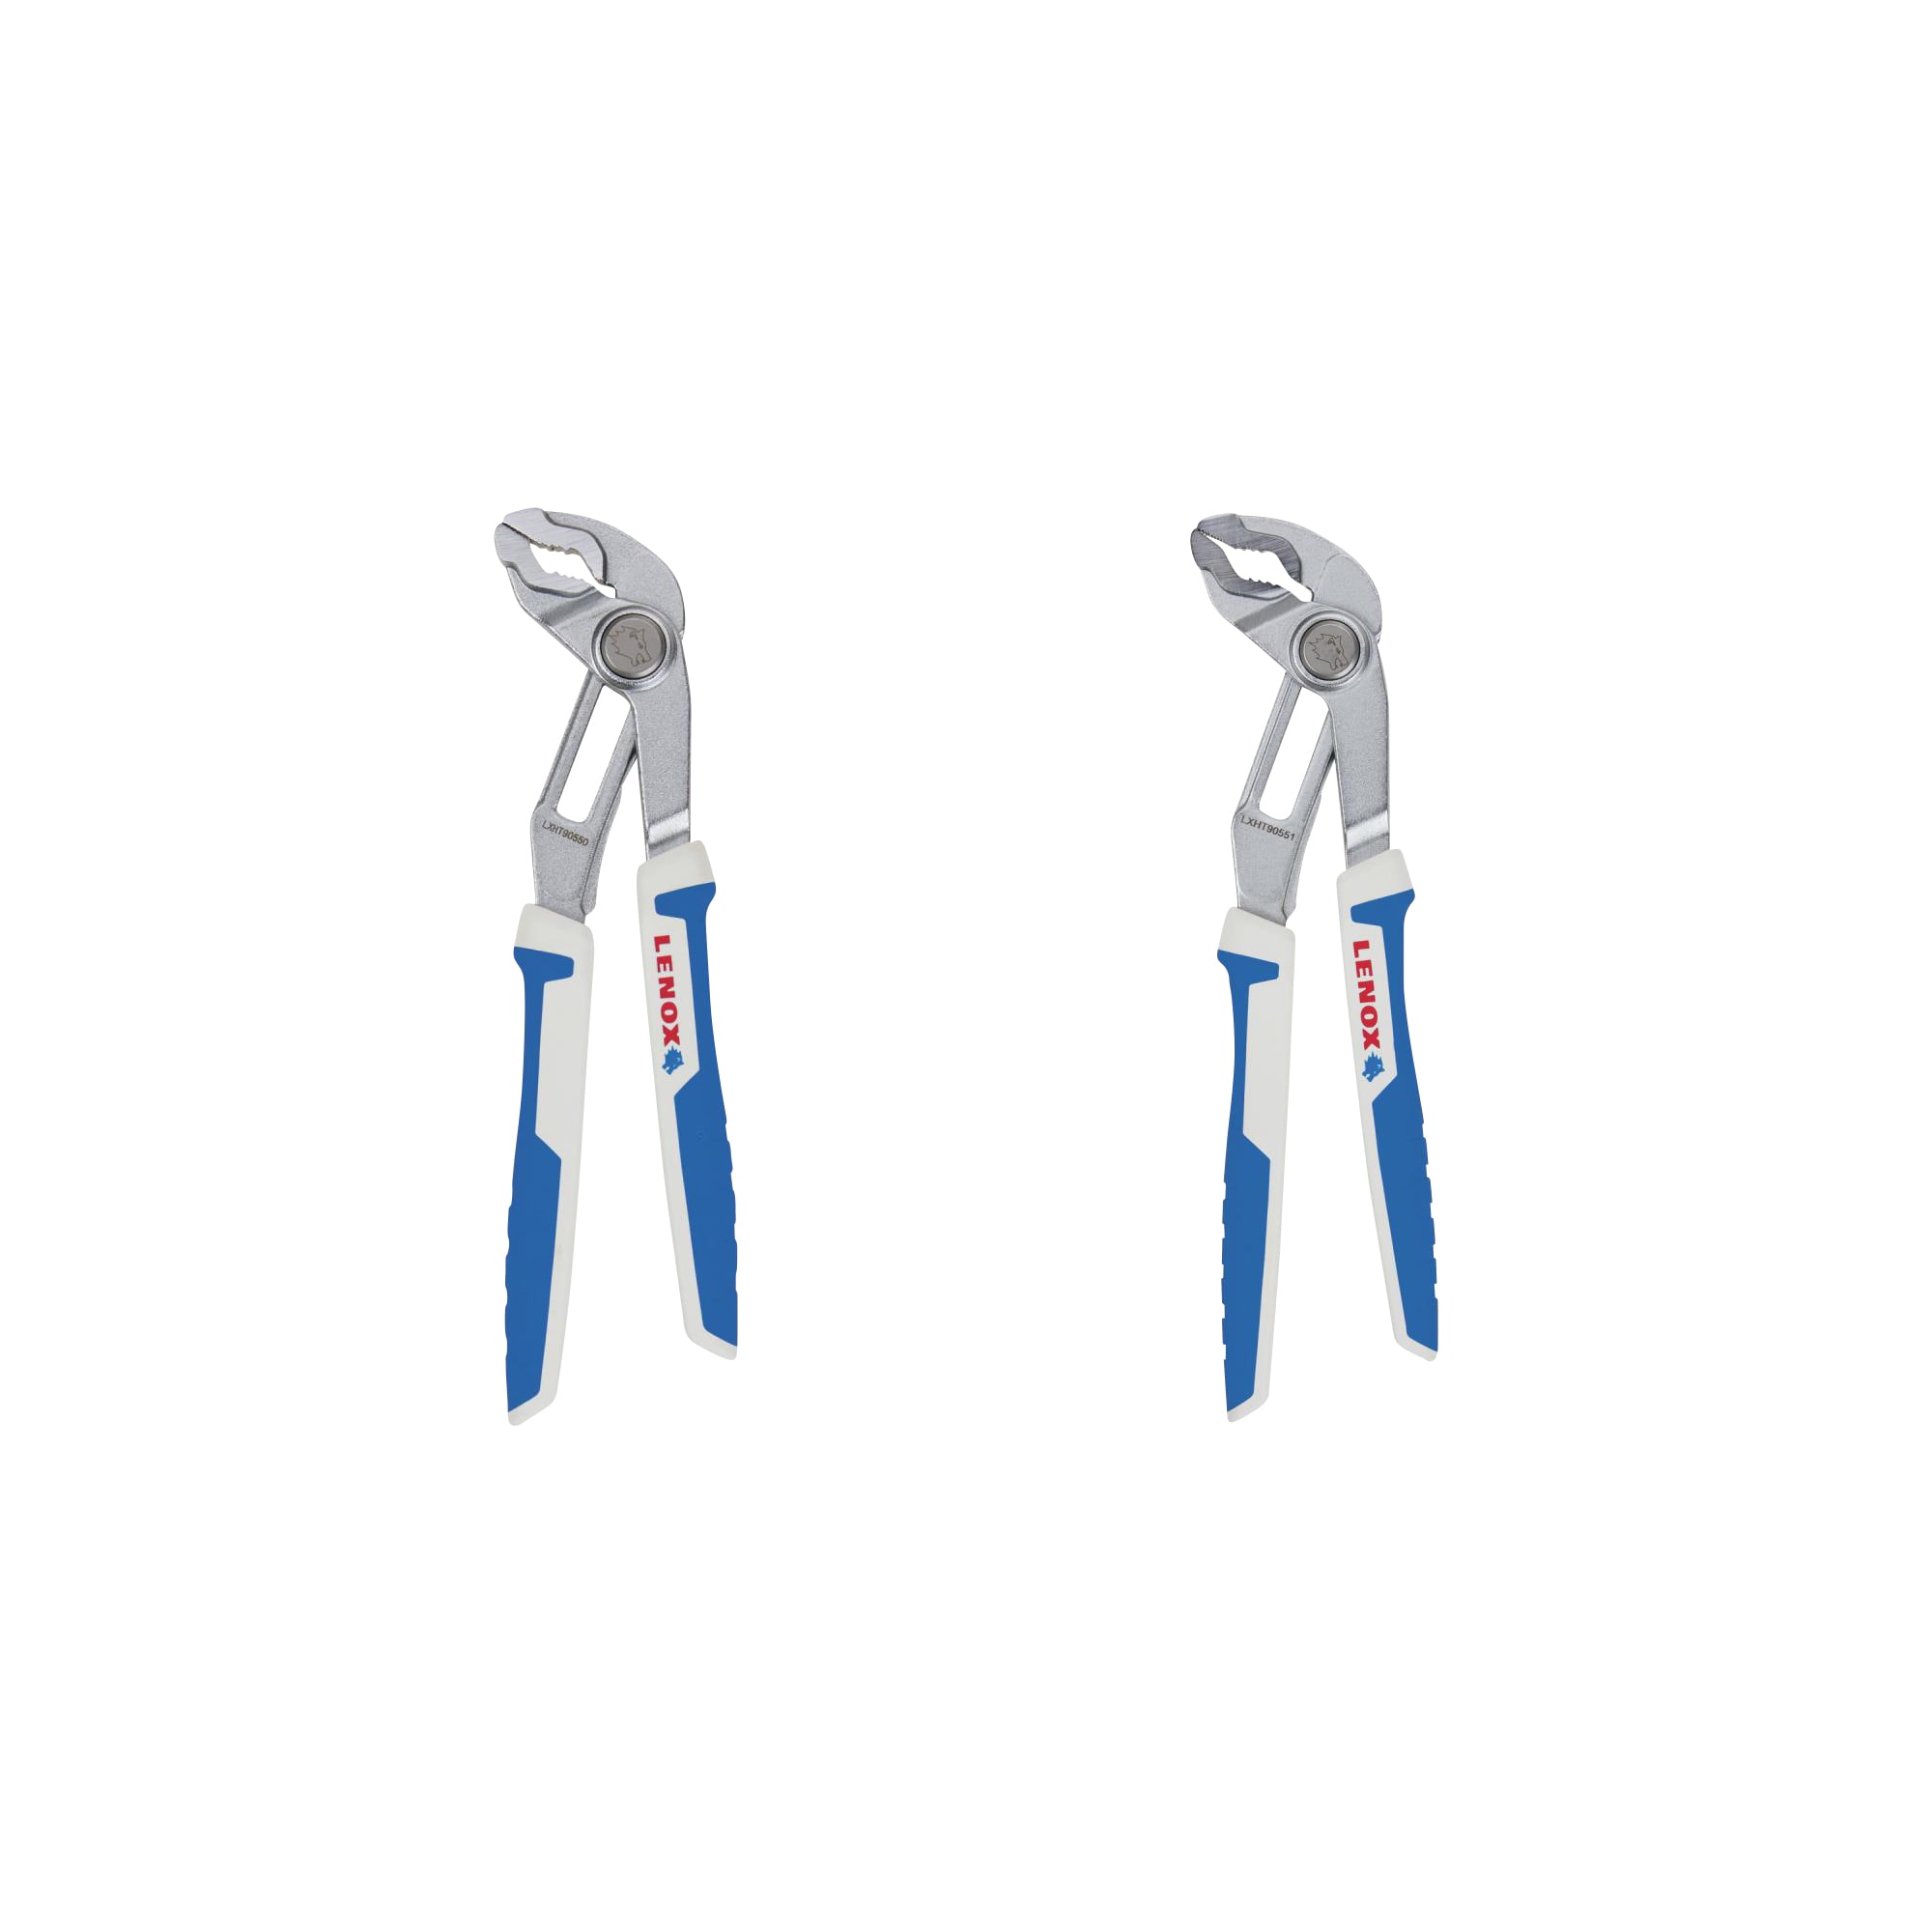 Eagle Grip 11 In C-Clamp/10 In Curved Jaw Locking Plier 2pc. Set